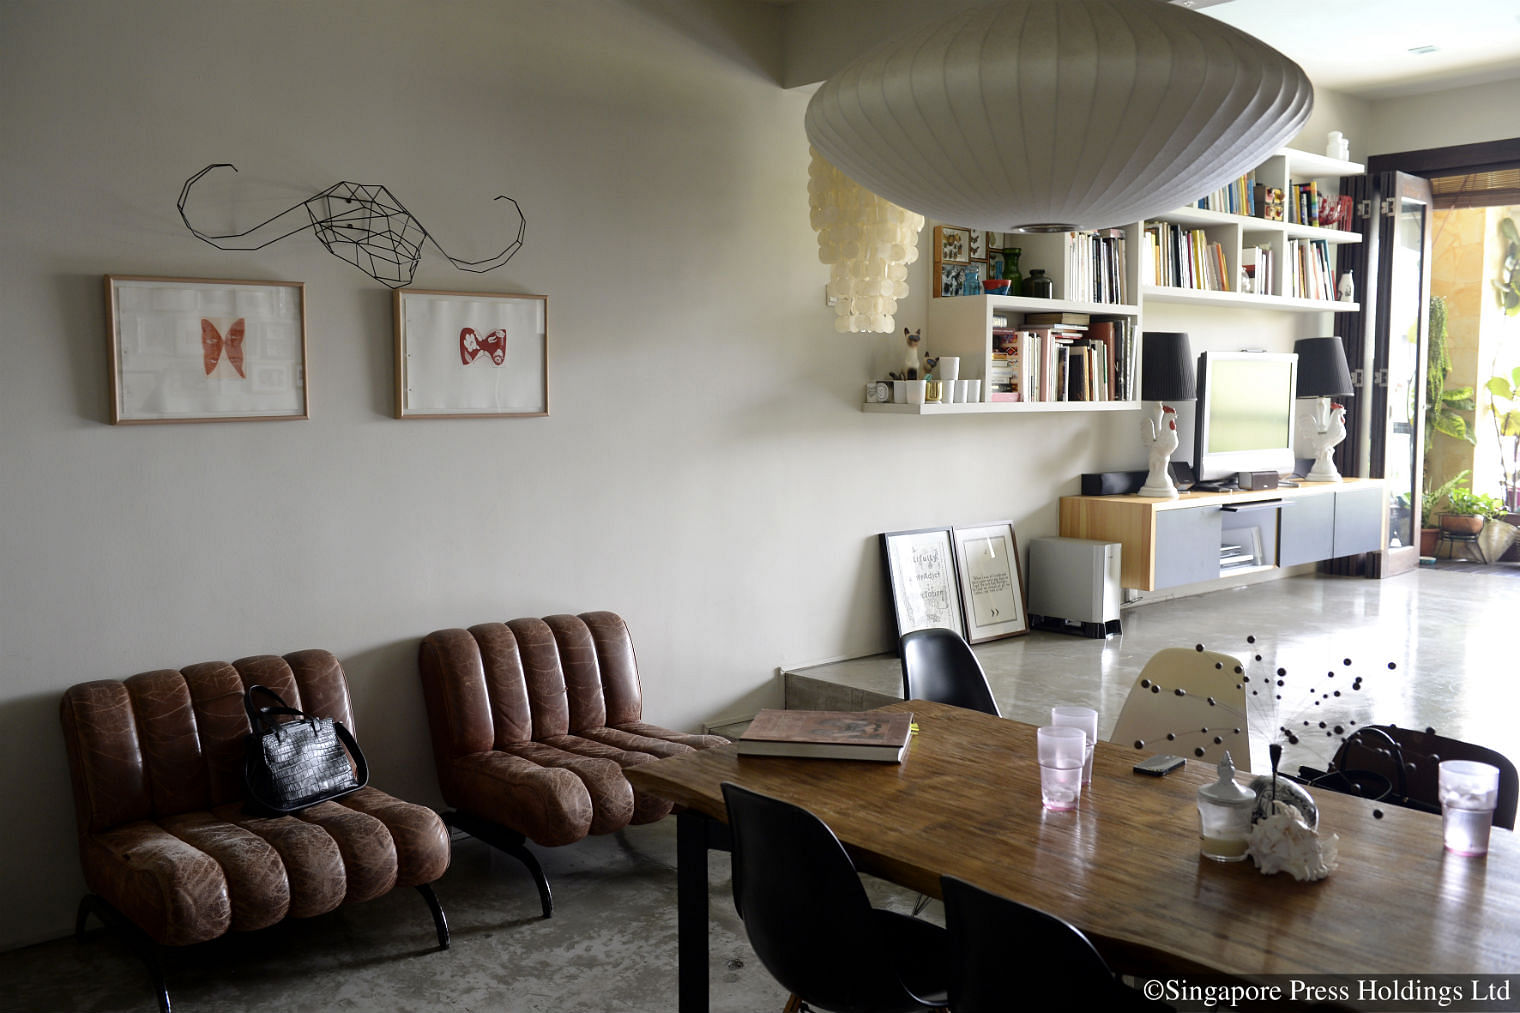 Two used leather chairs in the living room of Ms Goh Ling Ling's apartment in Toh Tuck Road. Ms Goh, who owns artisanal bag designer label Ling Wu, bought the mid-20th century, German-made chairs from a friend who used to deal in vintage furniture here.